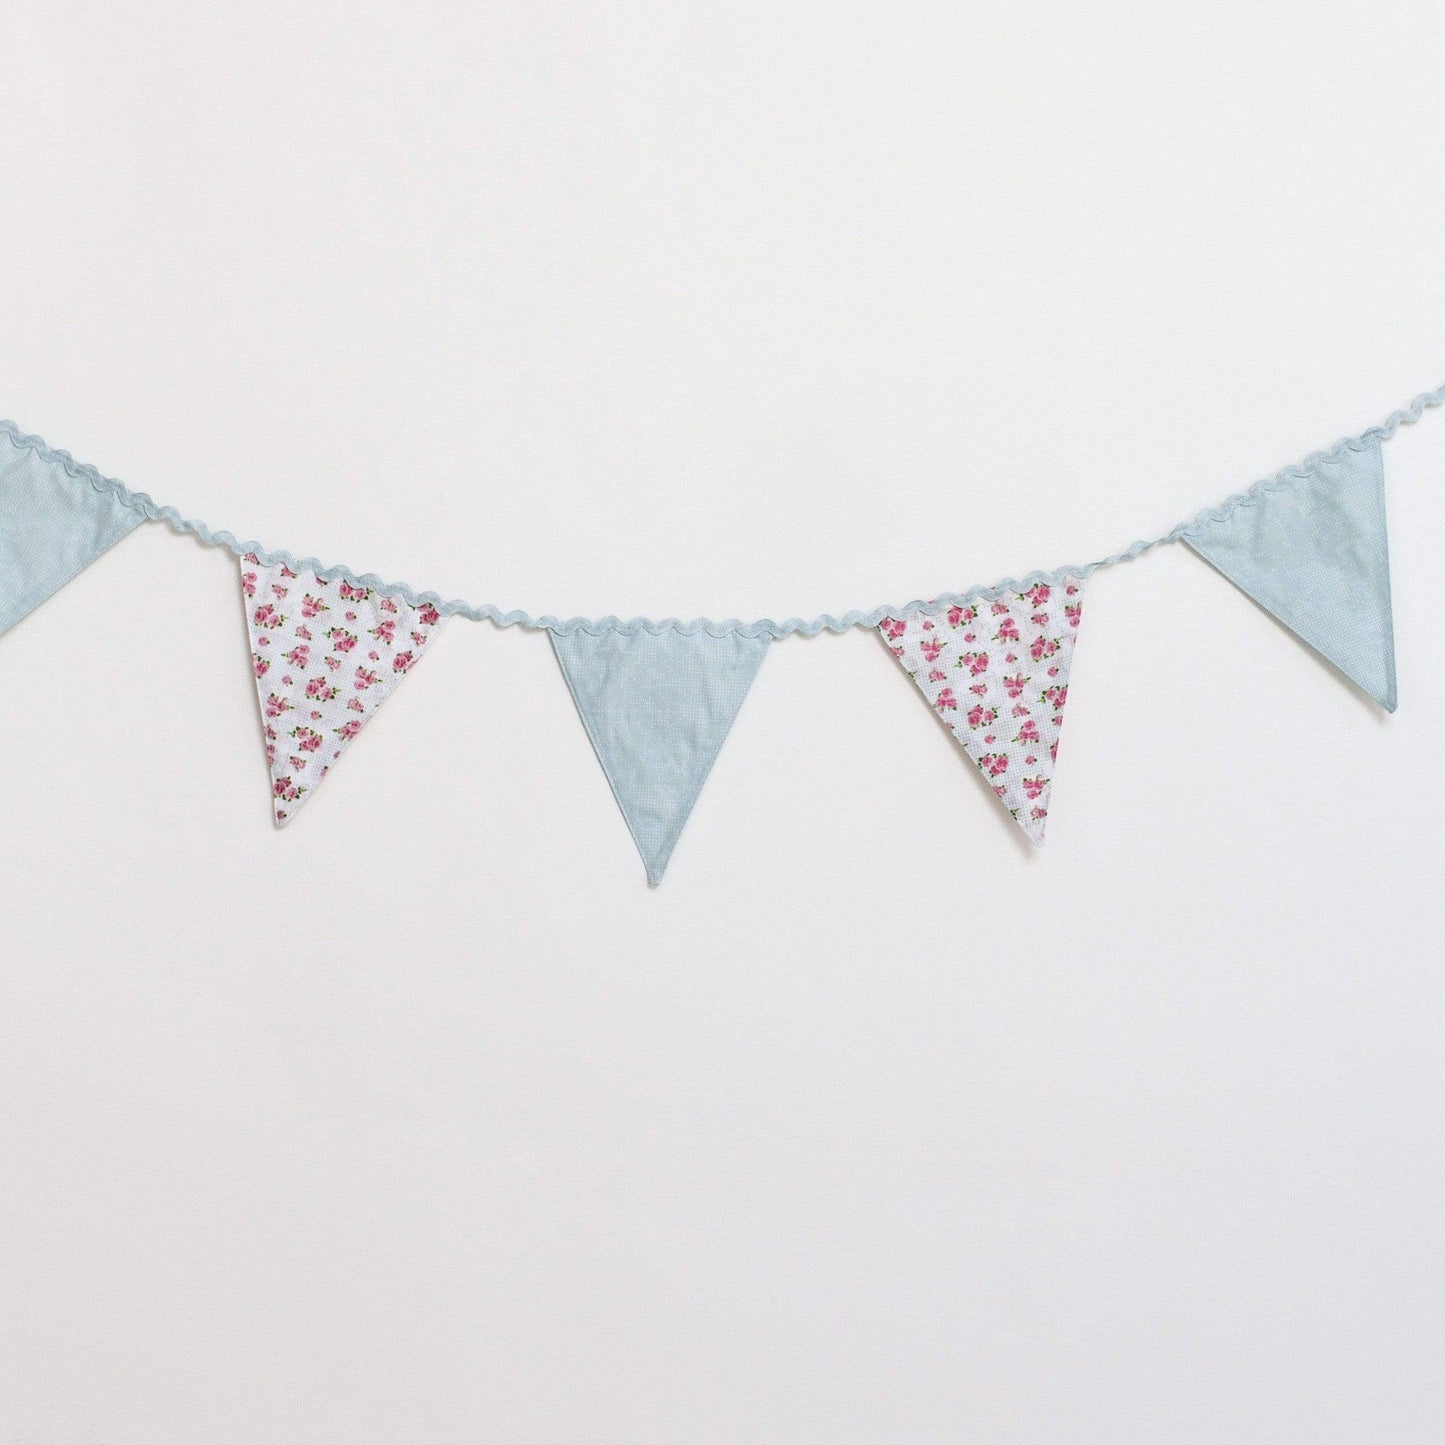 Floral Fabric Bunting - Vintage Tea Party - Pretty Little Party Shop Talking Tables